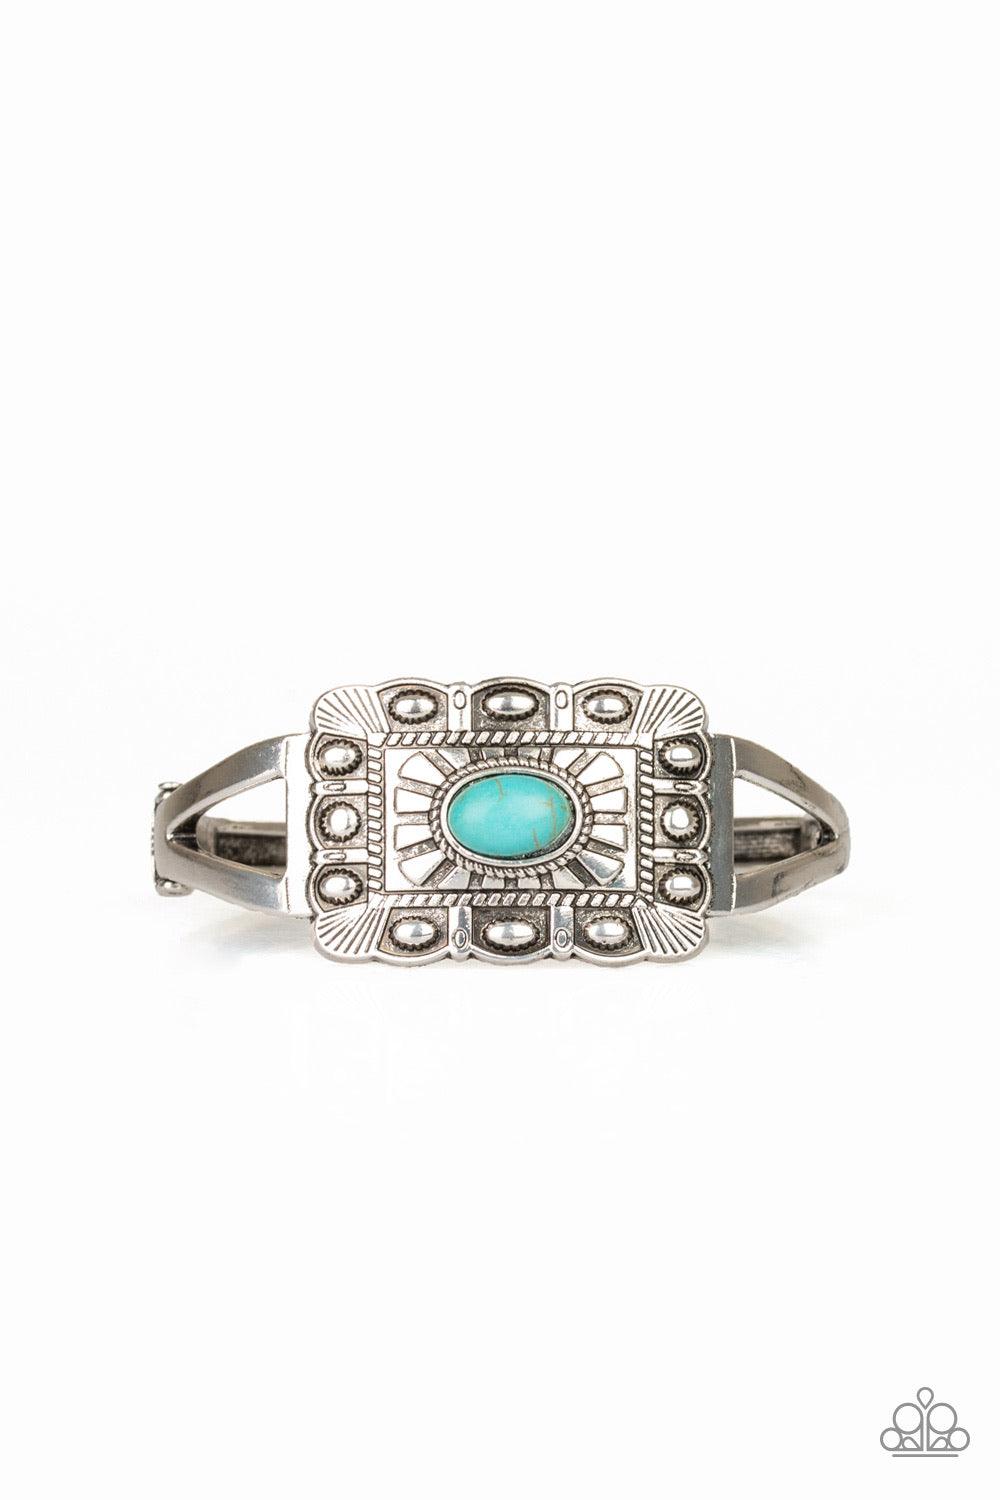 Paparazzi Accessories BIG House On The Prairie - Blue Embossed in sunburst patterns, a rectangular silver frame sits atop a bangle-like cuff for a seasonal flair. A refreshing turquoise stone is pressed into the center for a colorful finish. Features a hi